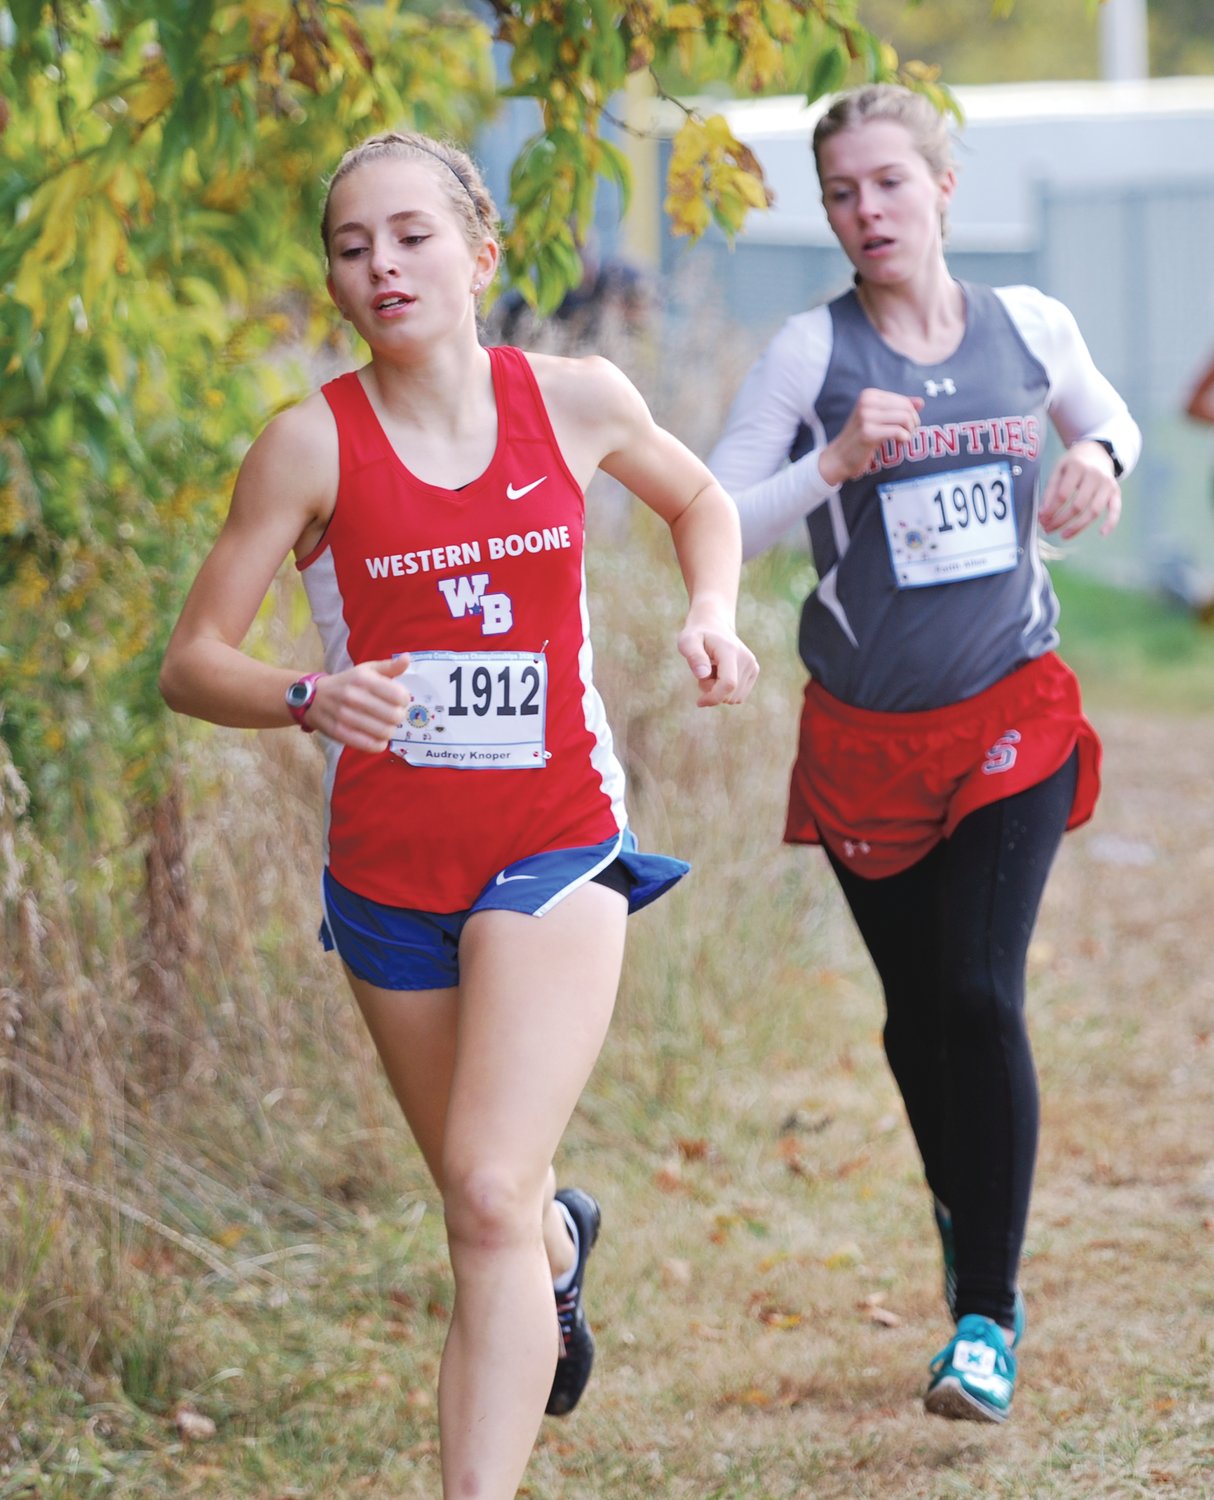 Western Boone's Audrey Knoper and Southmont's Faith Allen finished 1-2 at the Sagamore Conference meet on Saturday.